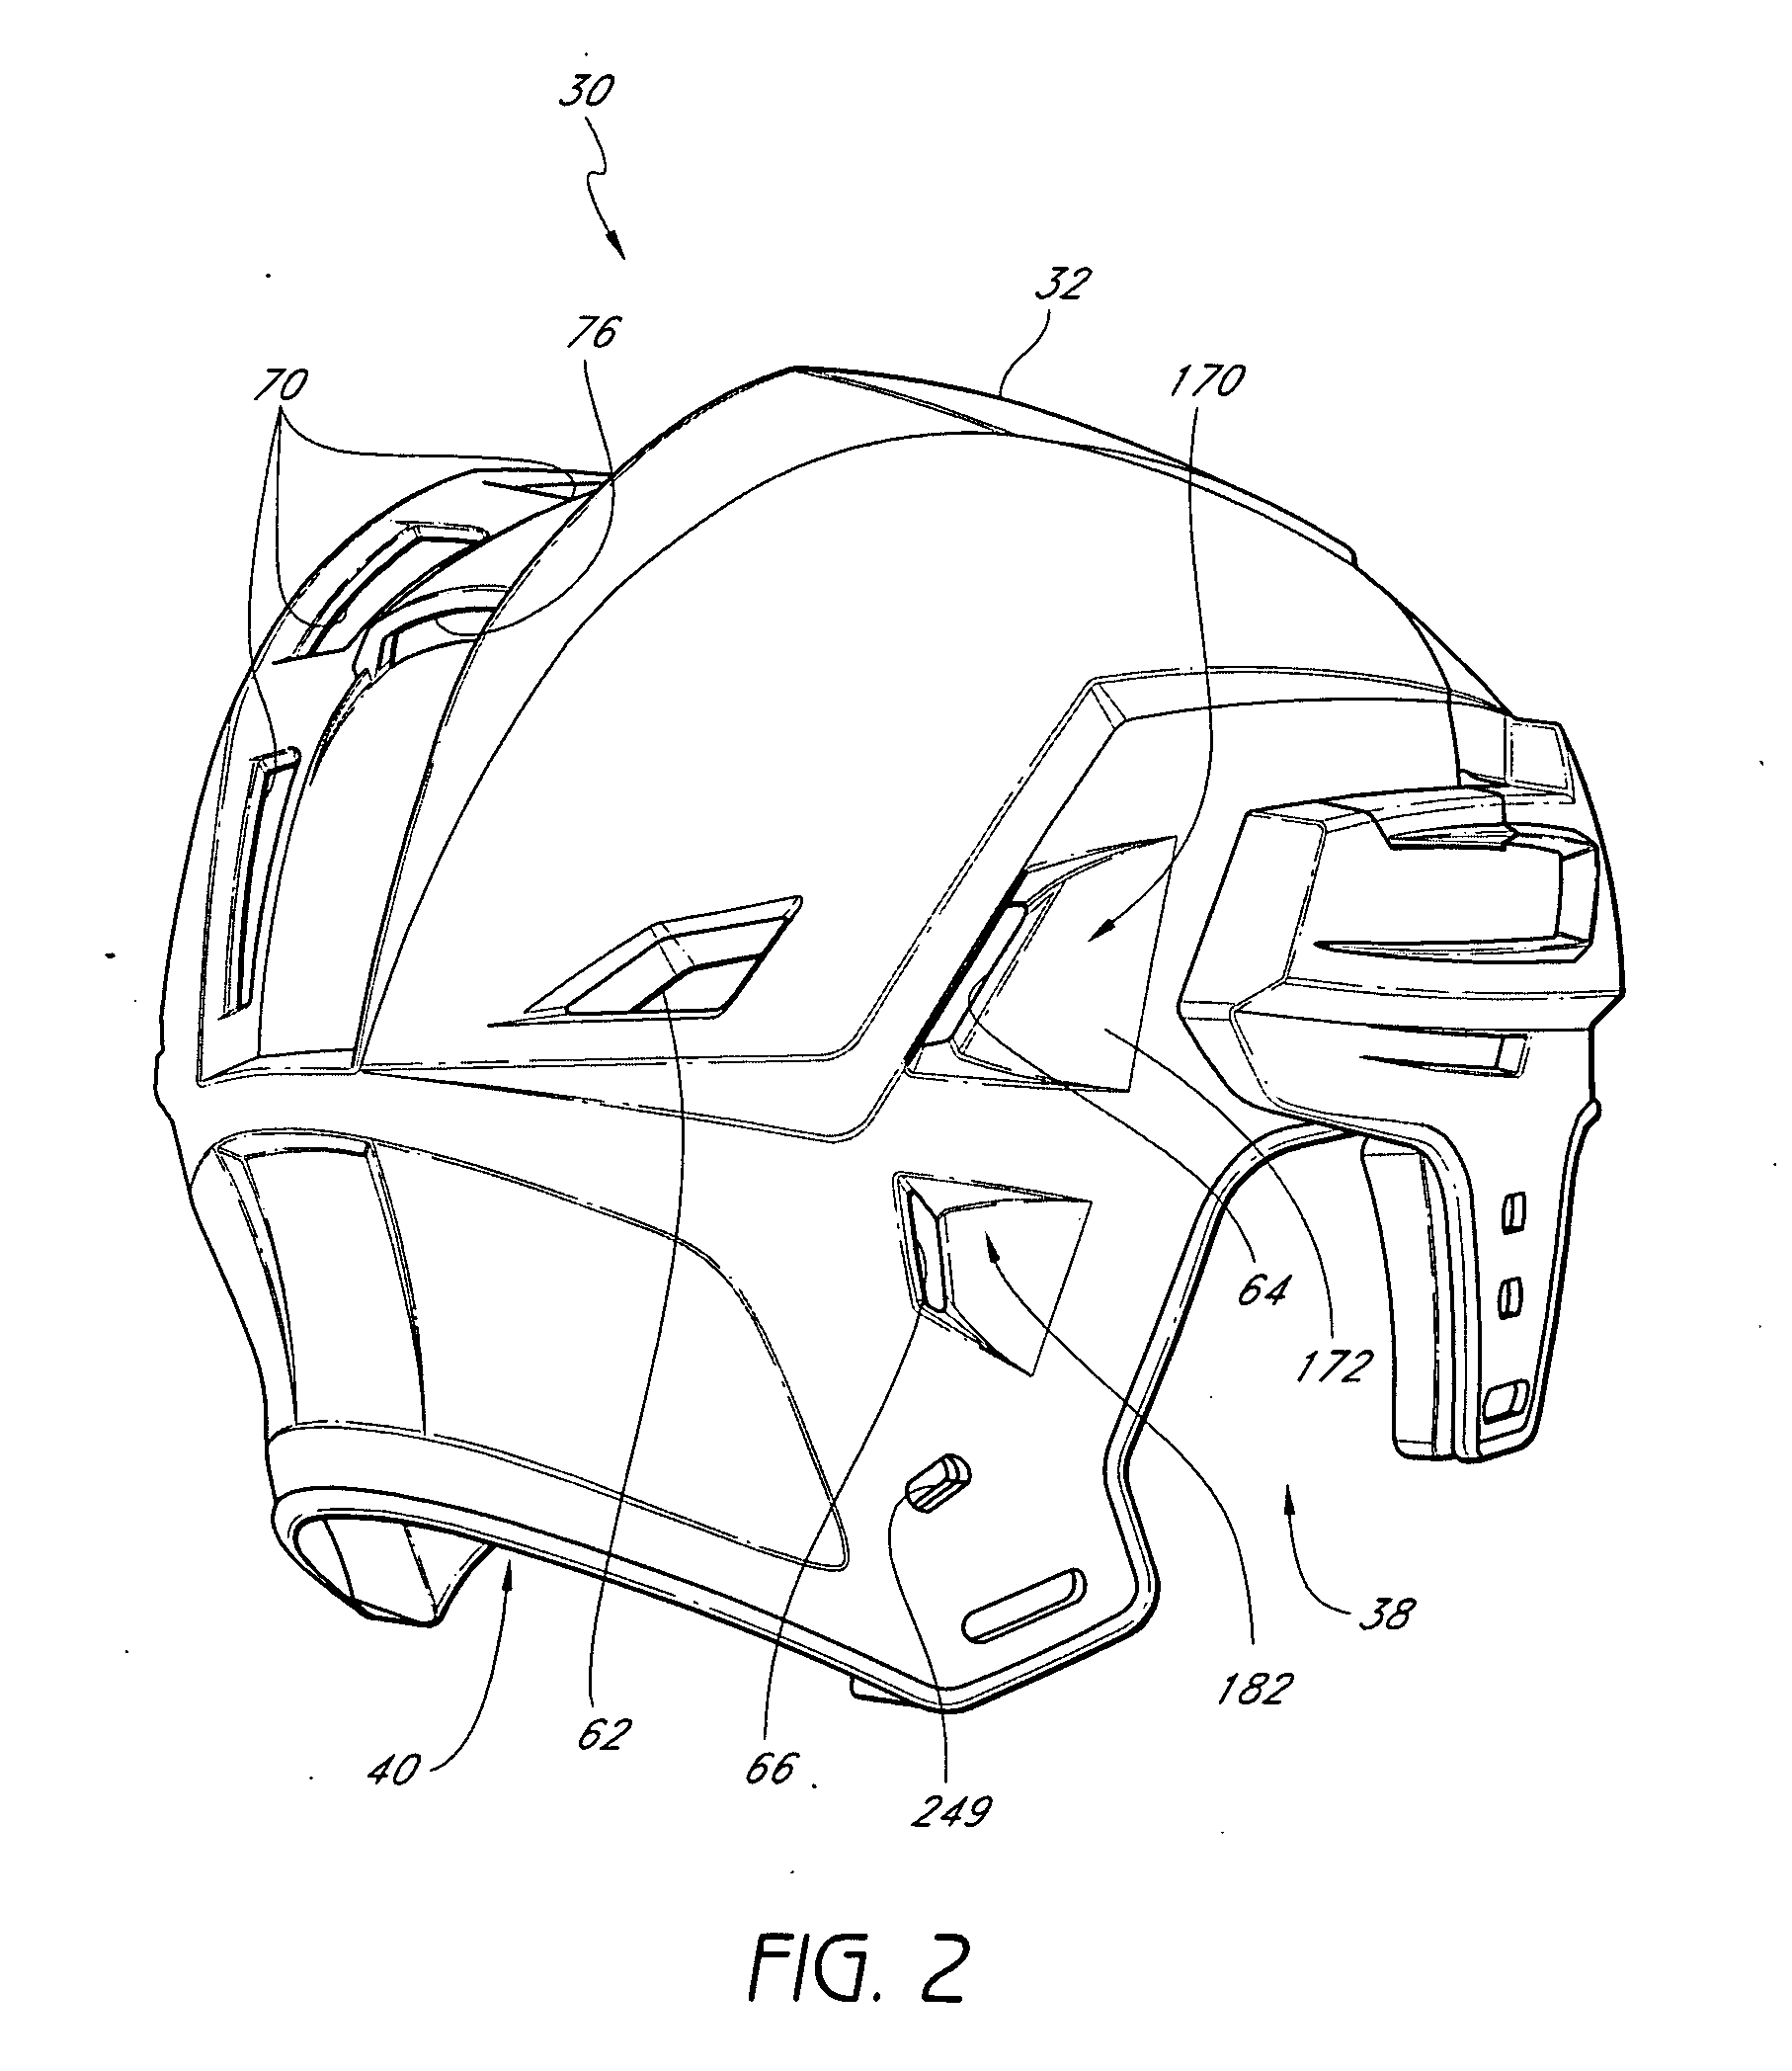 Helmet for a hockey or lacrosse player